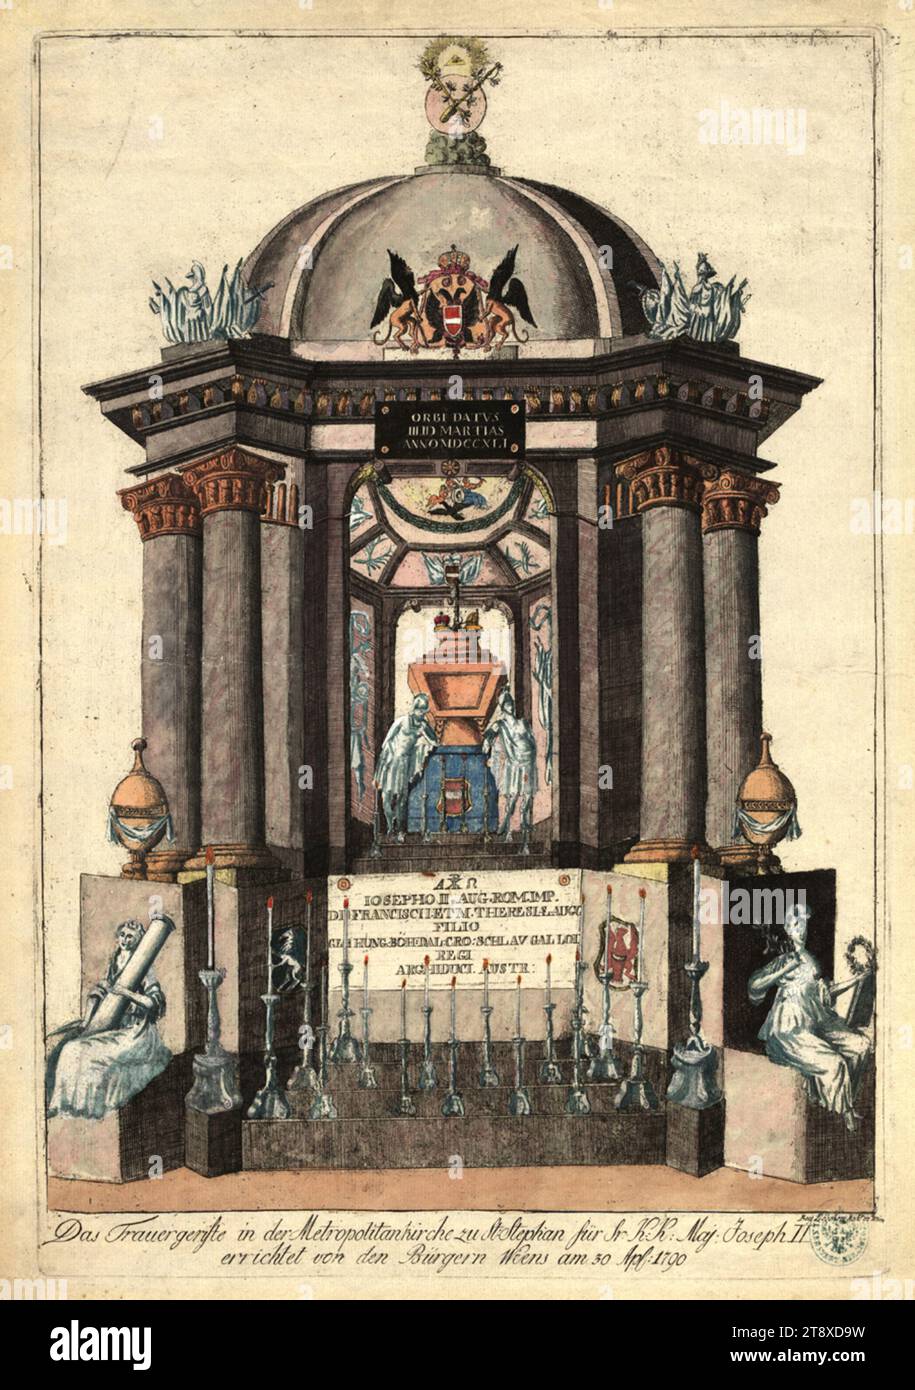 The mourning scaffold for Joseph II in St. Stephen's, erected on 30. April 1790, Johann Hieronymus Löschenkohl (1753-1807), publishing house, 1790, paper, colorised, copperplate engraving, plate size 47, 5×32, 5 cm, sheet size 51×37, 5 cm, Habsburgs, Disease and Death, St. Stephan's Cathedral, Dynastic Events, Fine Arts, coffin, The Vienna Collection Stock Photo